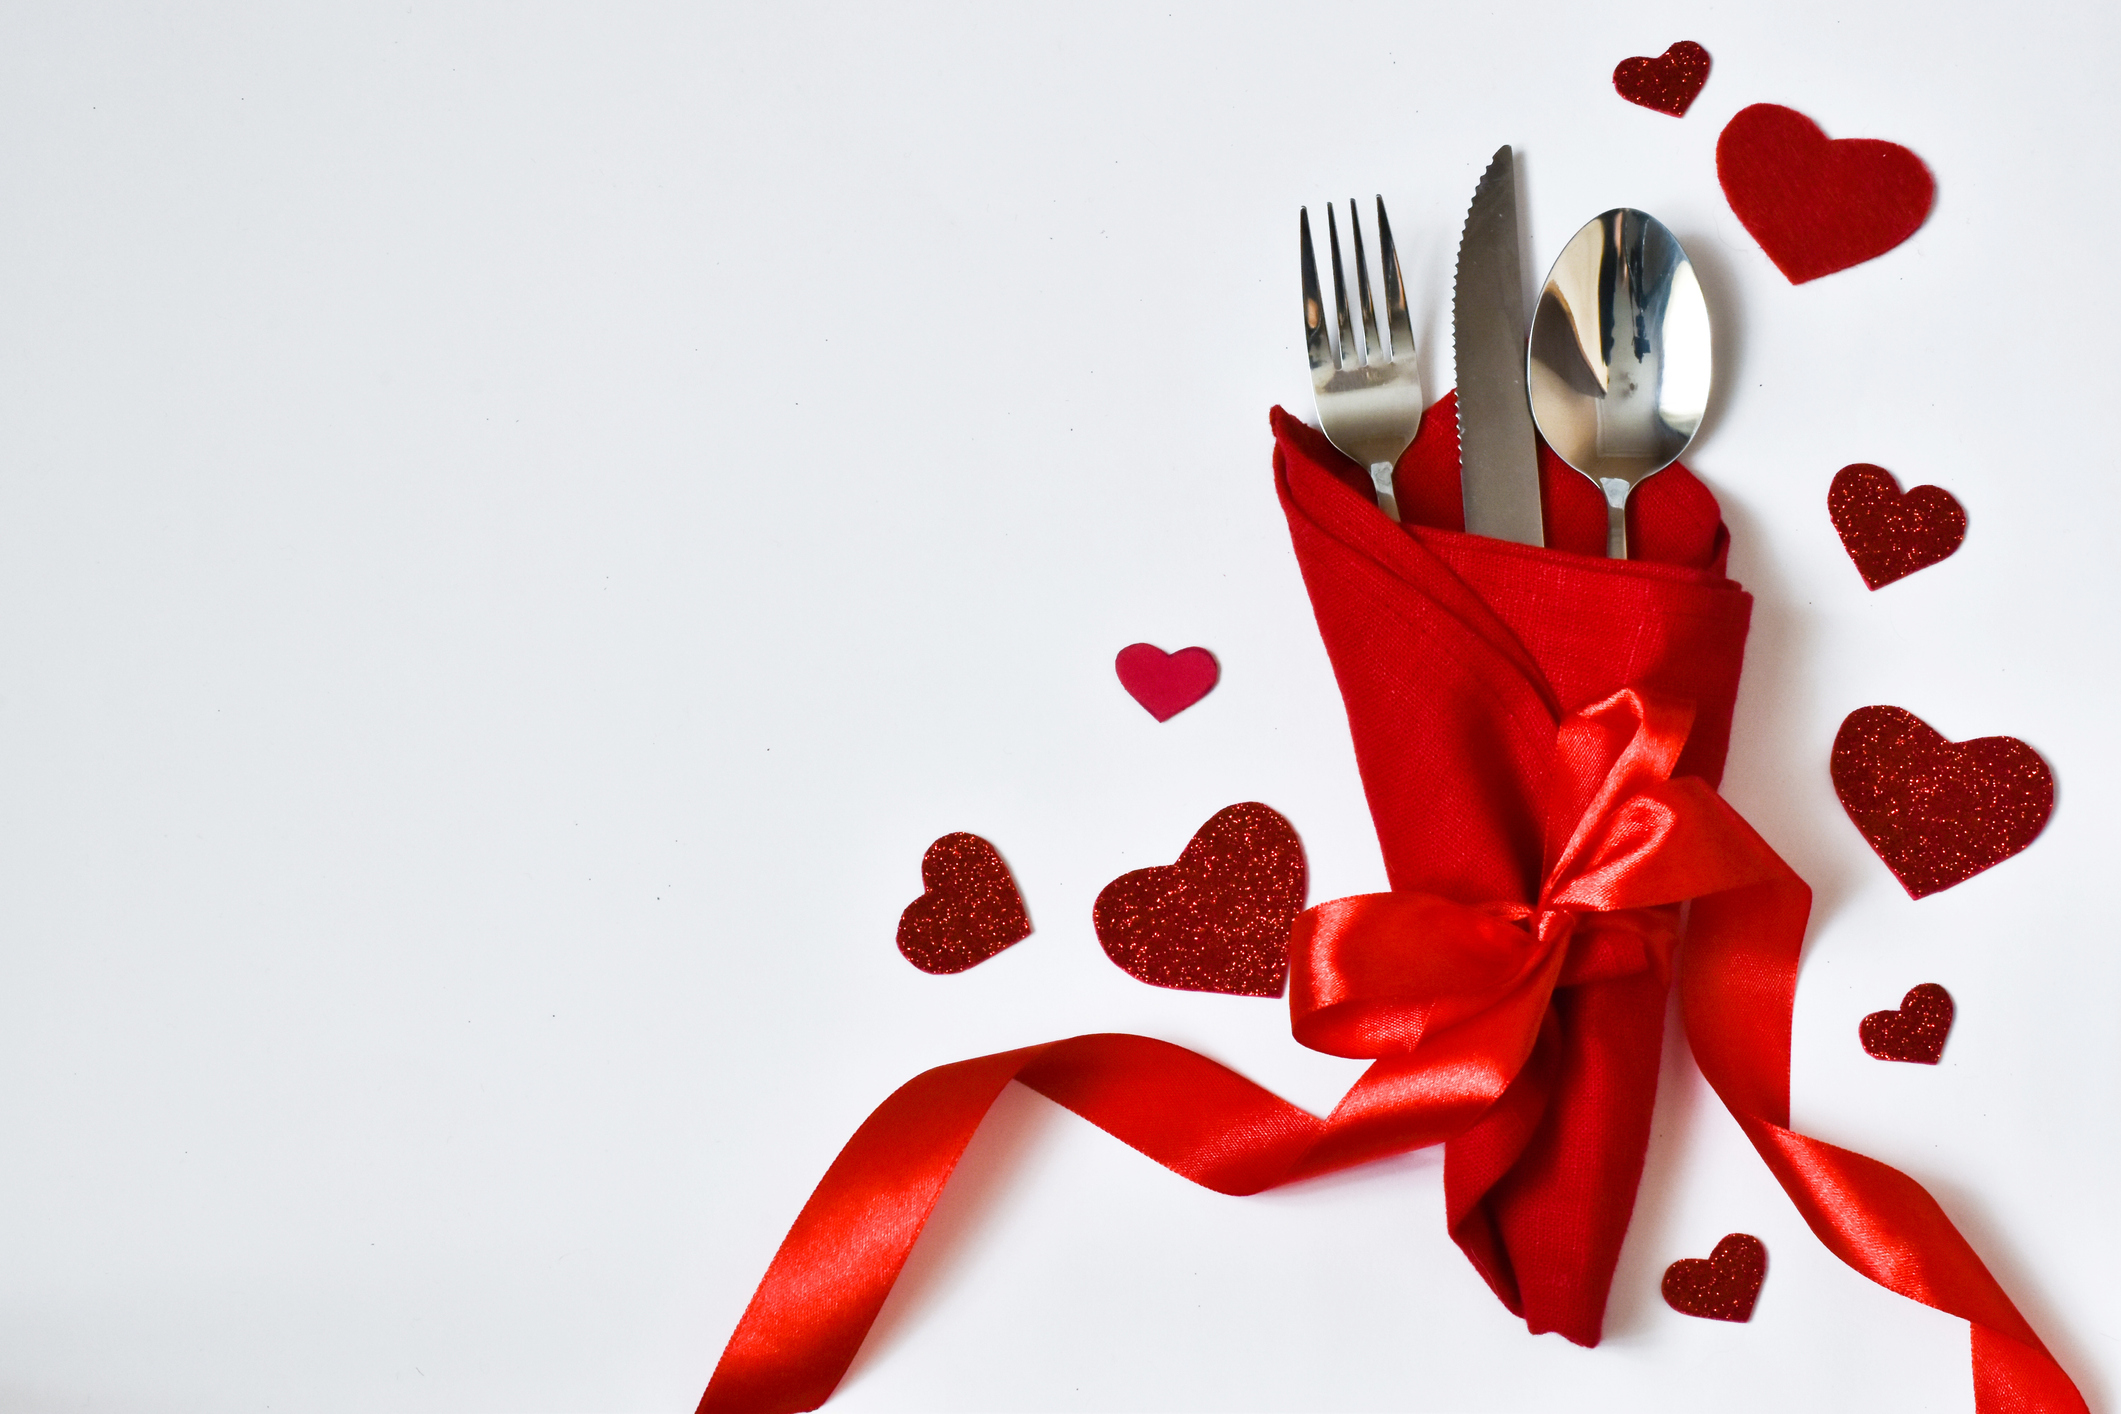 Day. table place setting and cutlery, napkin with red hearts for Valentine day. Holiday concept. Valentine's Day card. Menu for the valentine's Day.